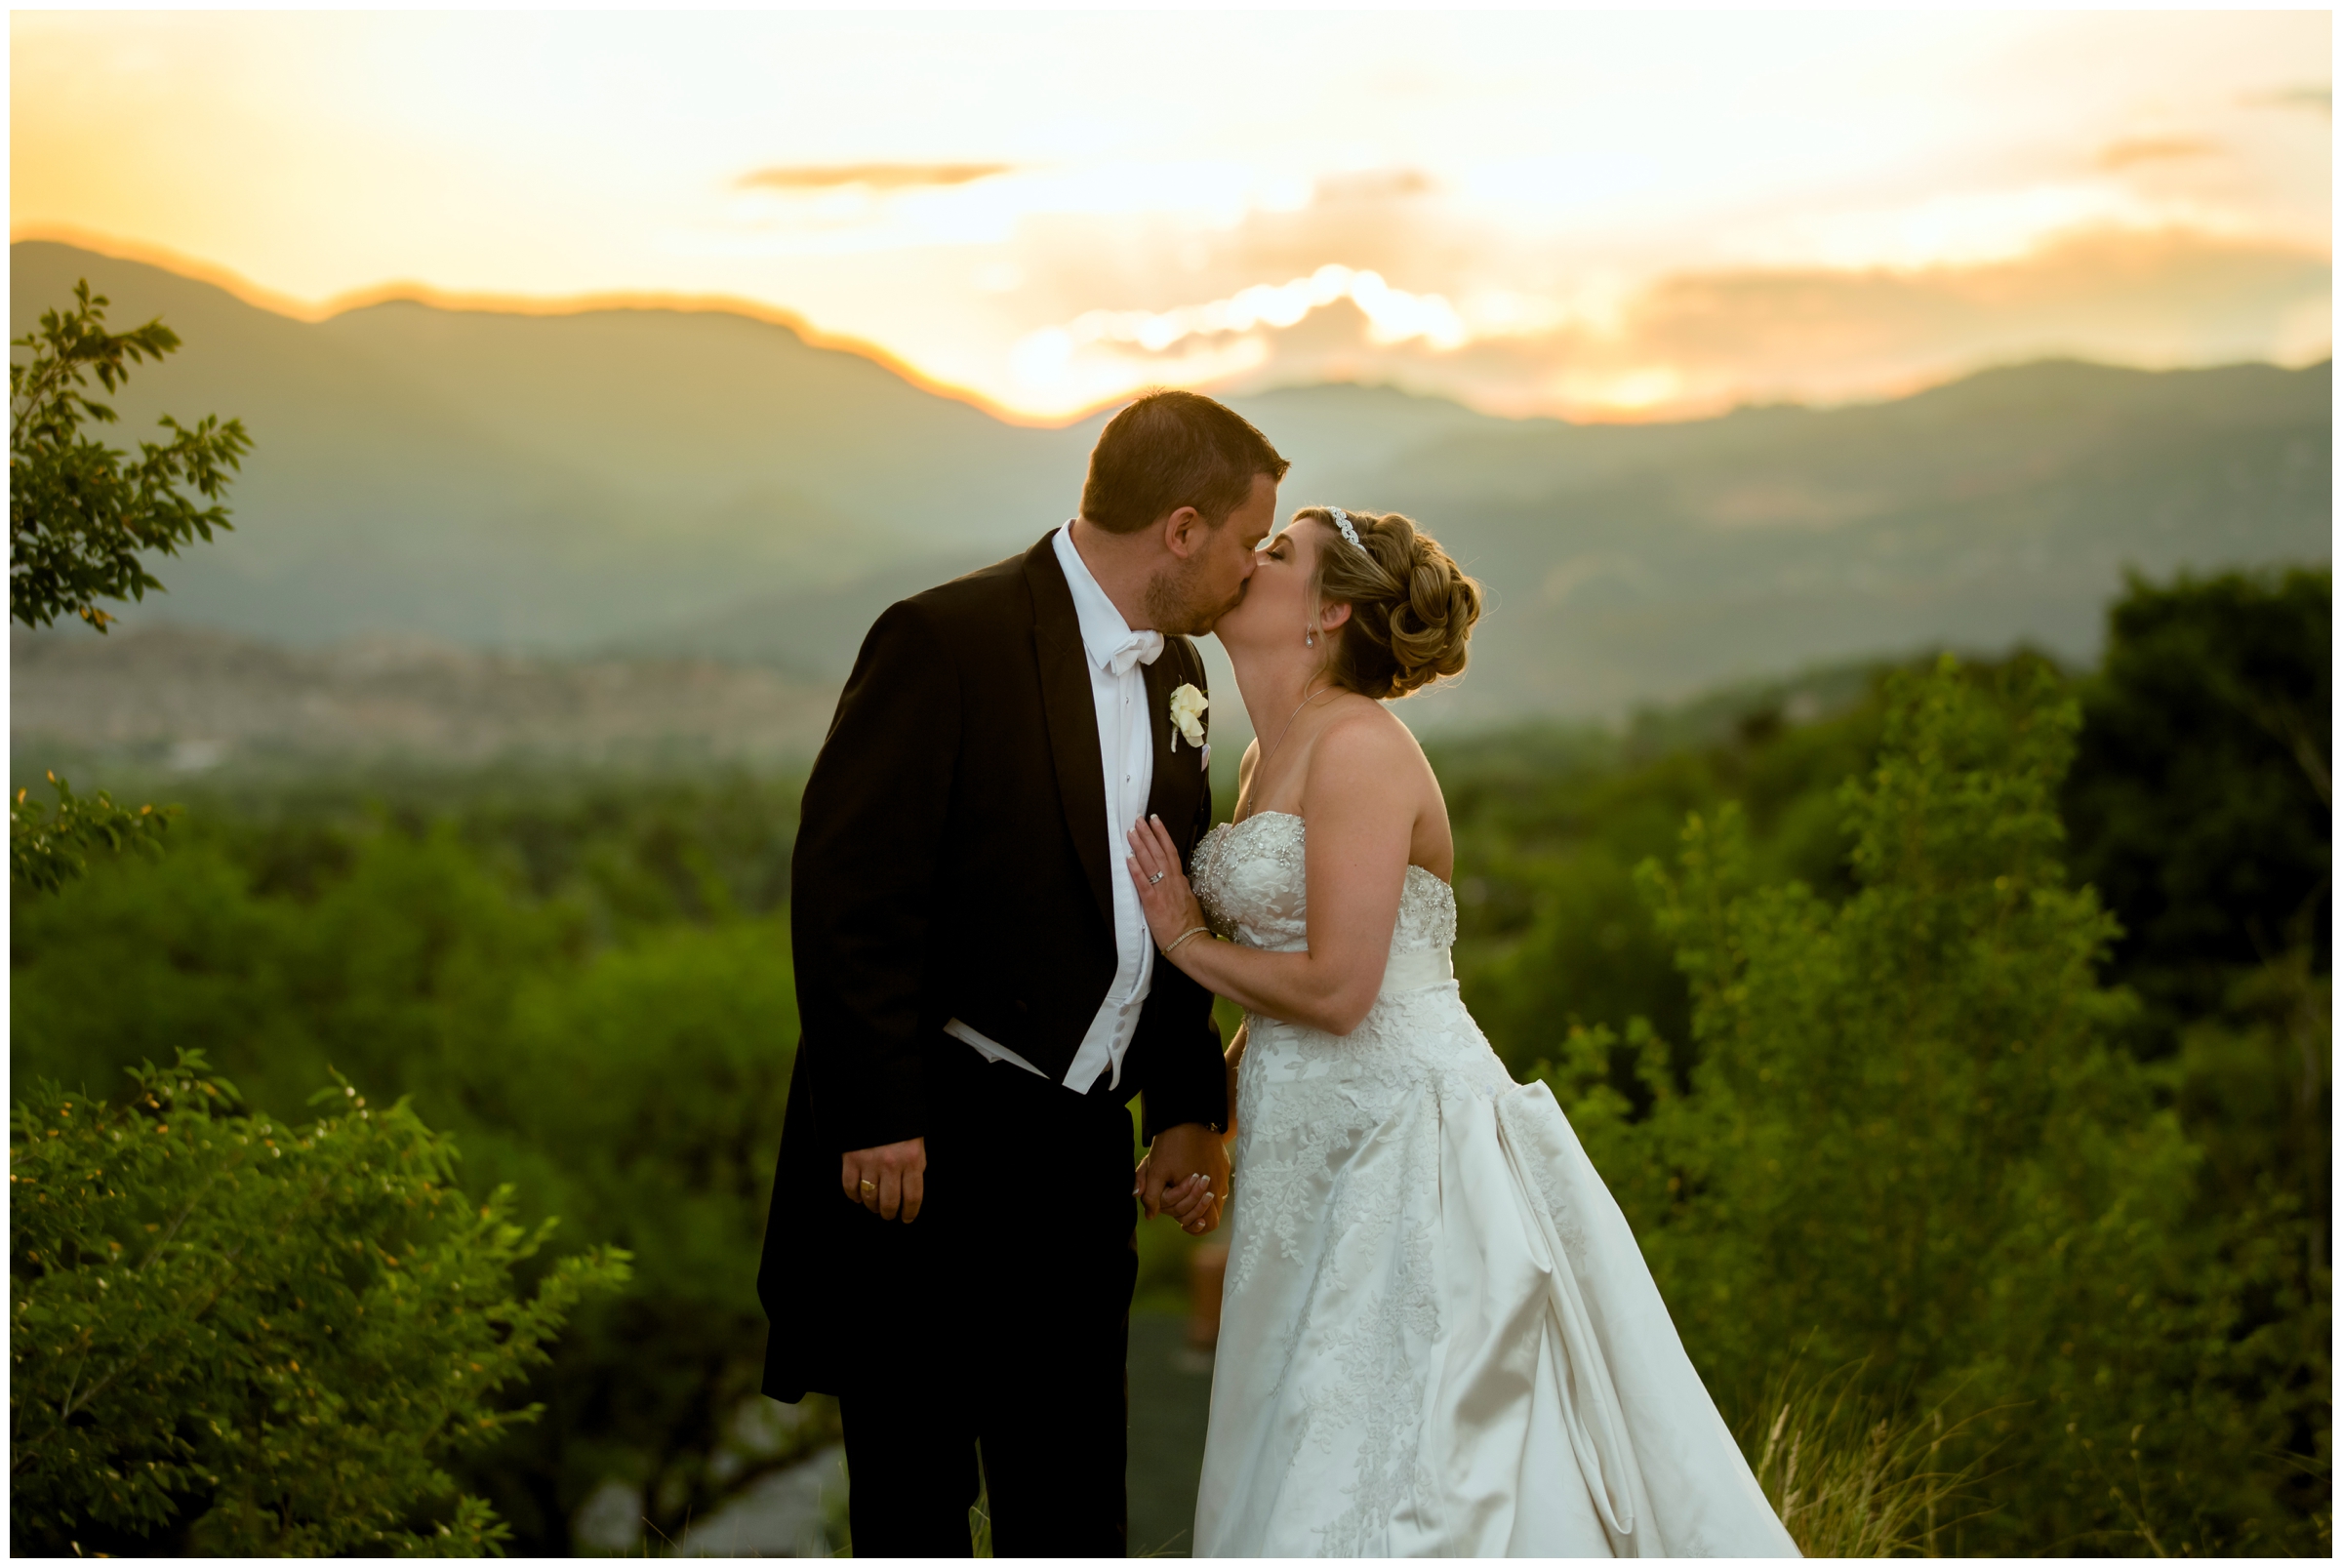 The Pinery at the Hill wedding photos by Colorado Springs photographer Plum Pretty Photography